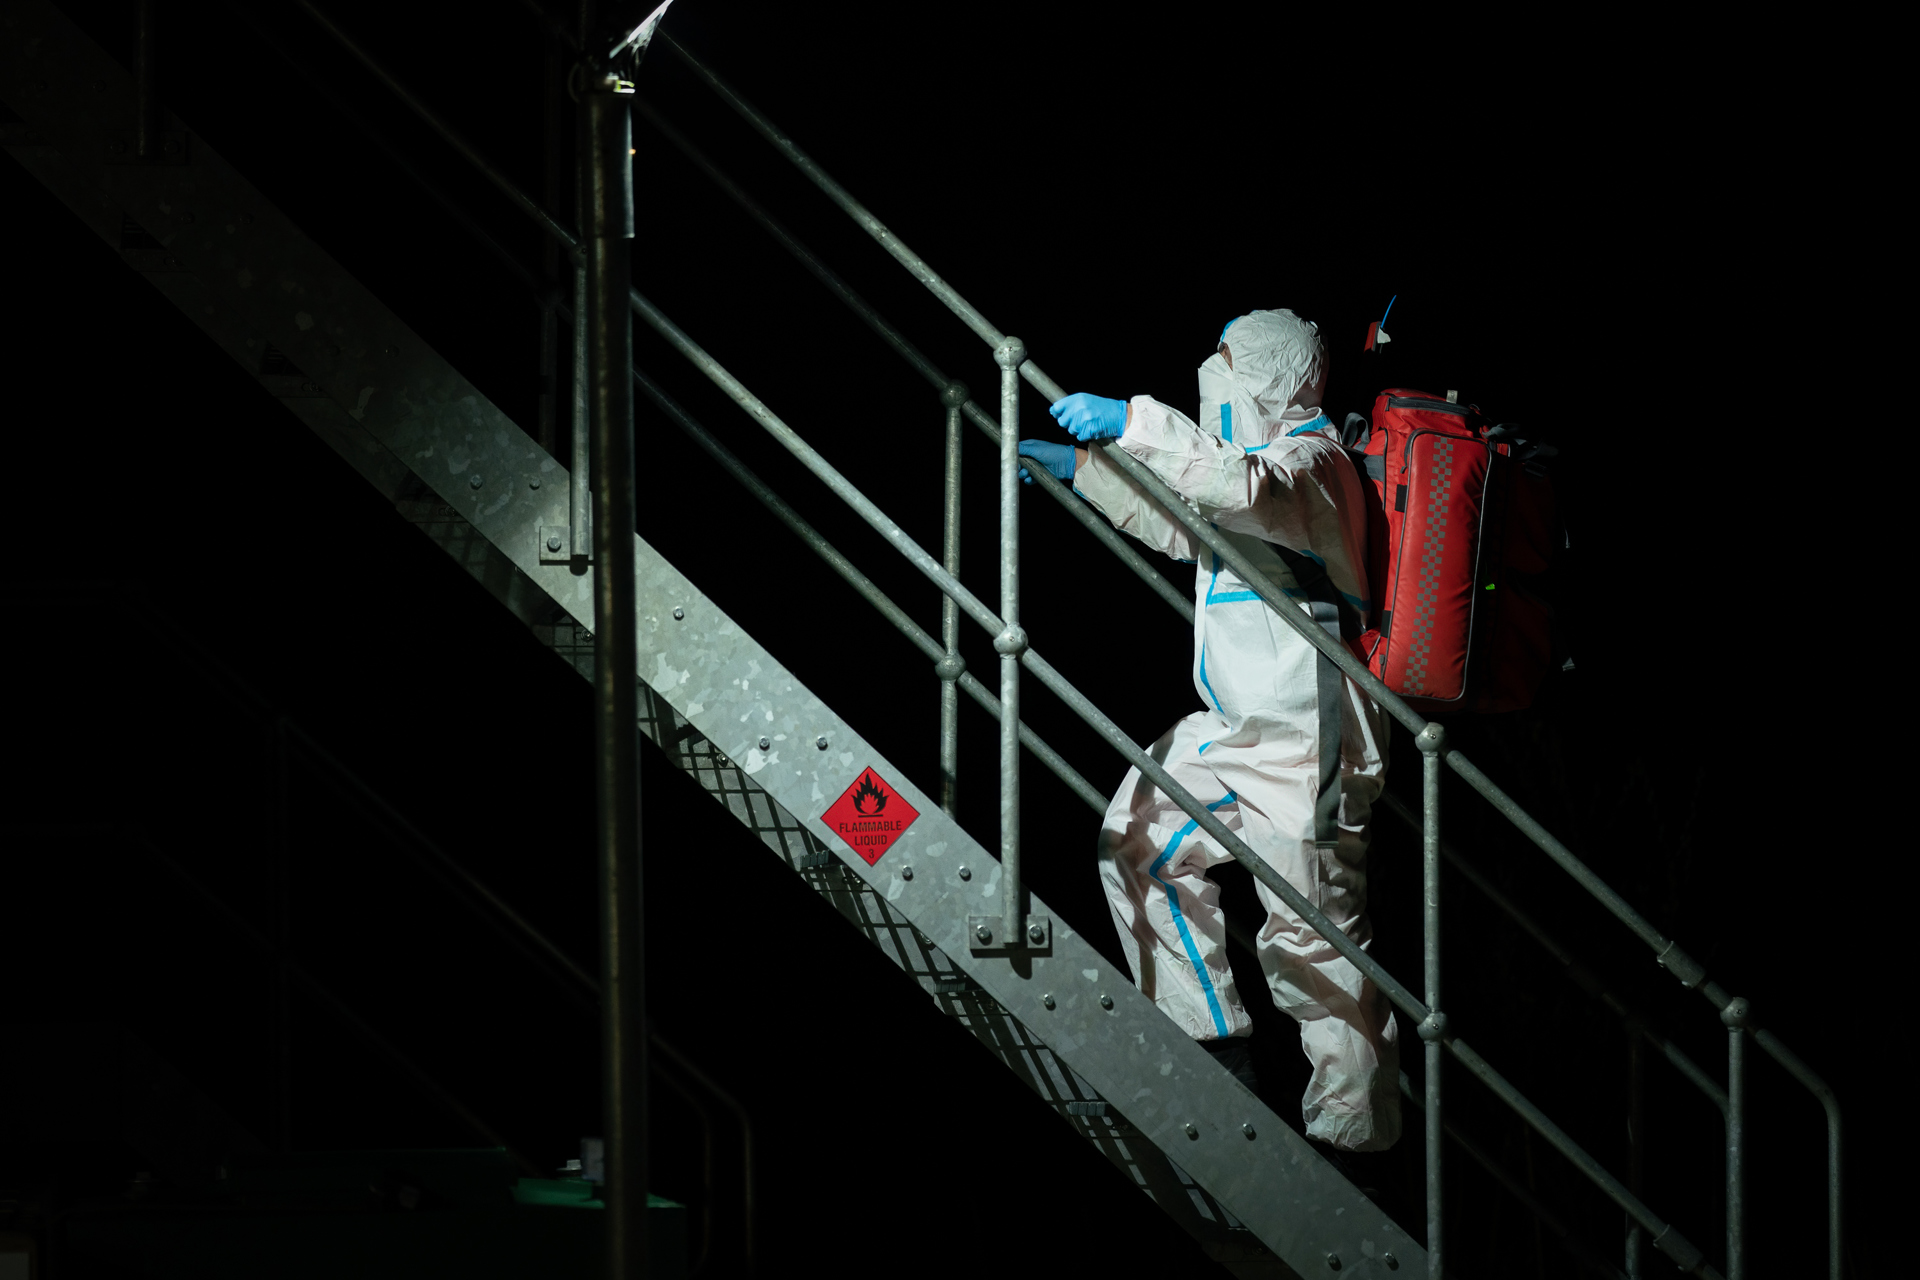 A photo of a paramedic in full hazmat PPE ascending metal stairs with a red kit bag on their back.